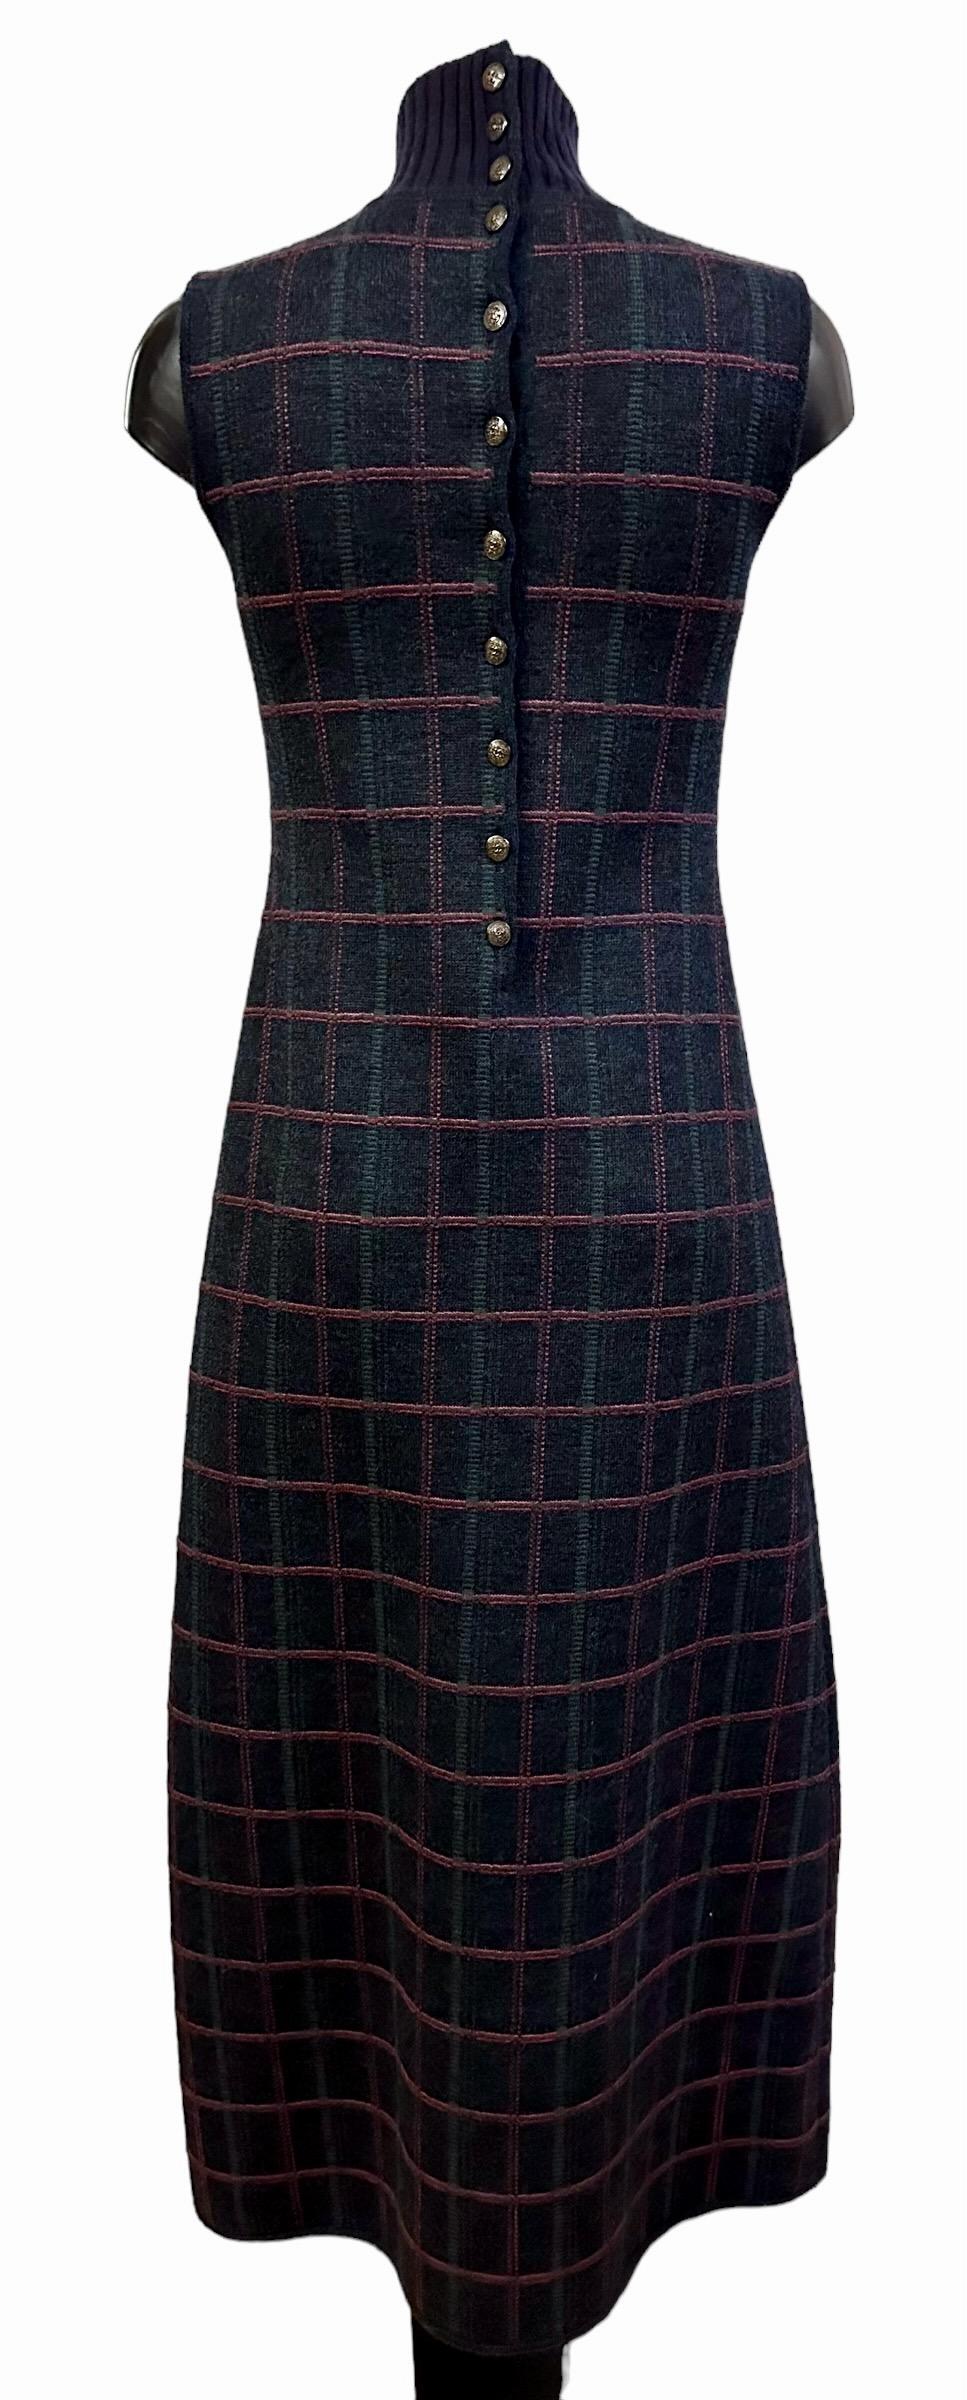 Immaculate maxi dress from the Chanel collection of the Métiers d'Art Paris Edinburgh 2012 / 2013.
Crafted in a Tartan pattern tweed this dress is perfect in its simplicity.

Collection: Métiers d'Art Paris Edinburgh 2012/2013
Fabric: 34% virgin